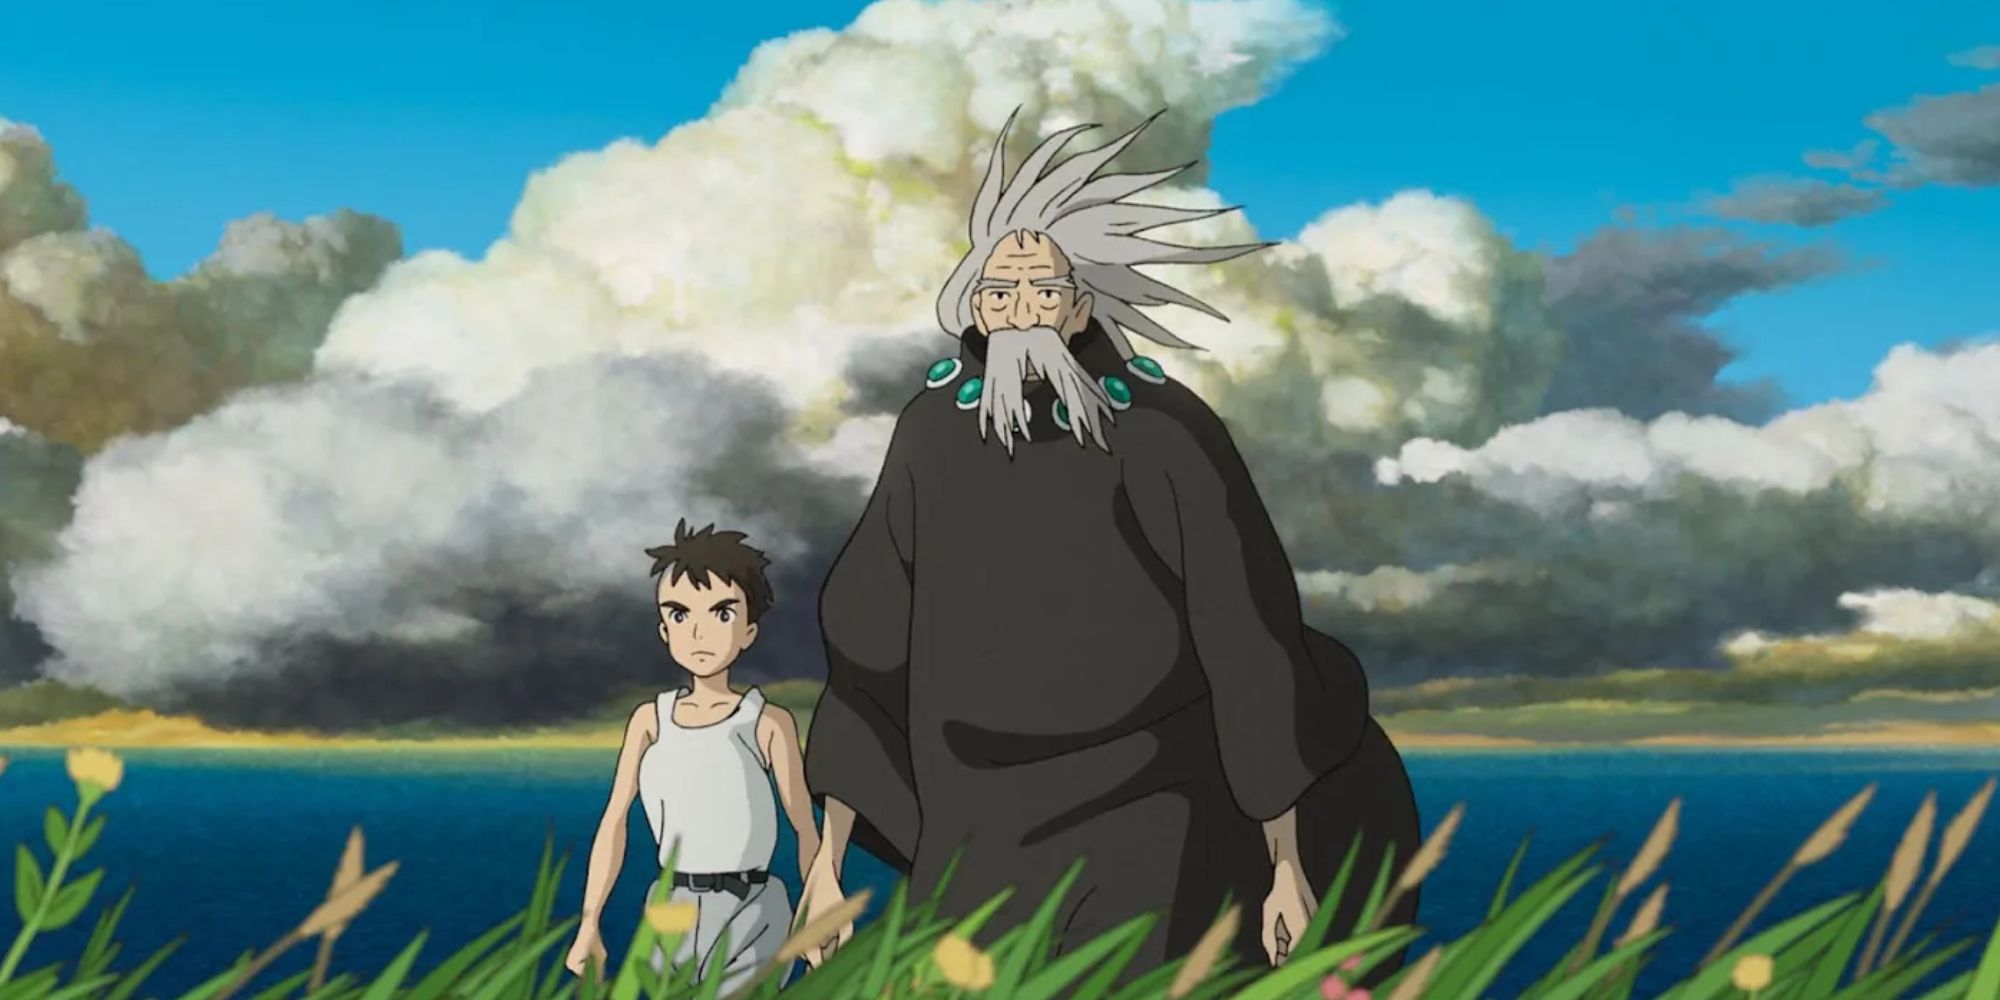 Granduncle and his nephew walking together in The Boy and the Heron